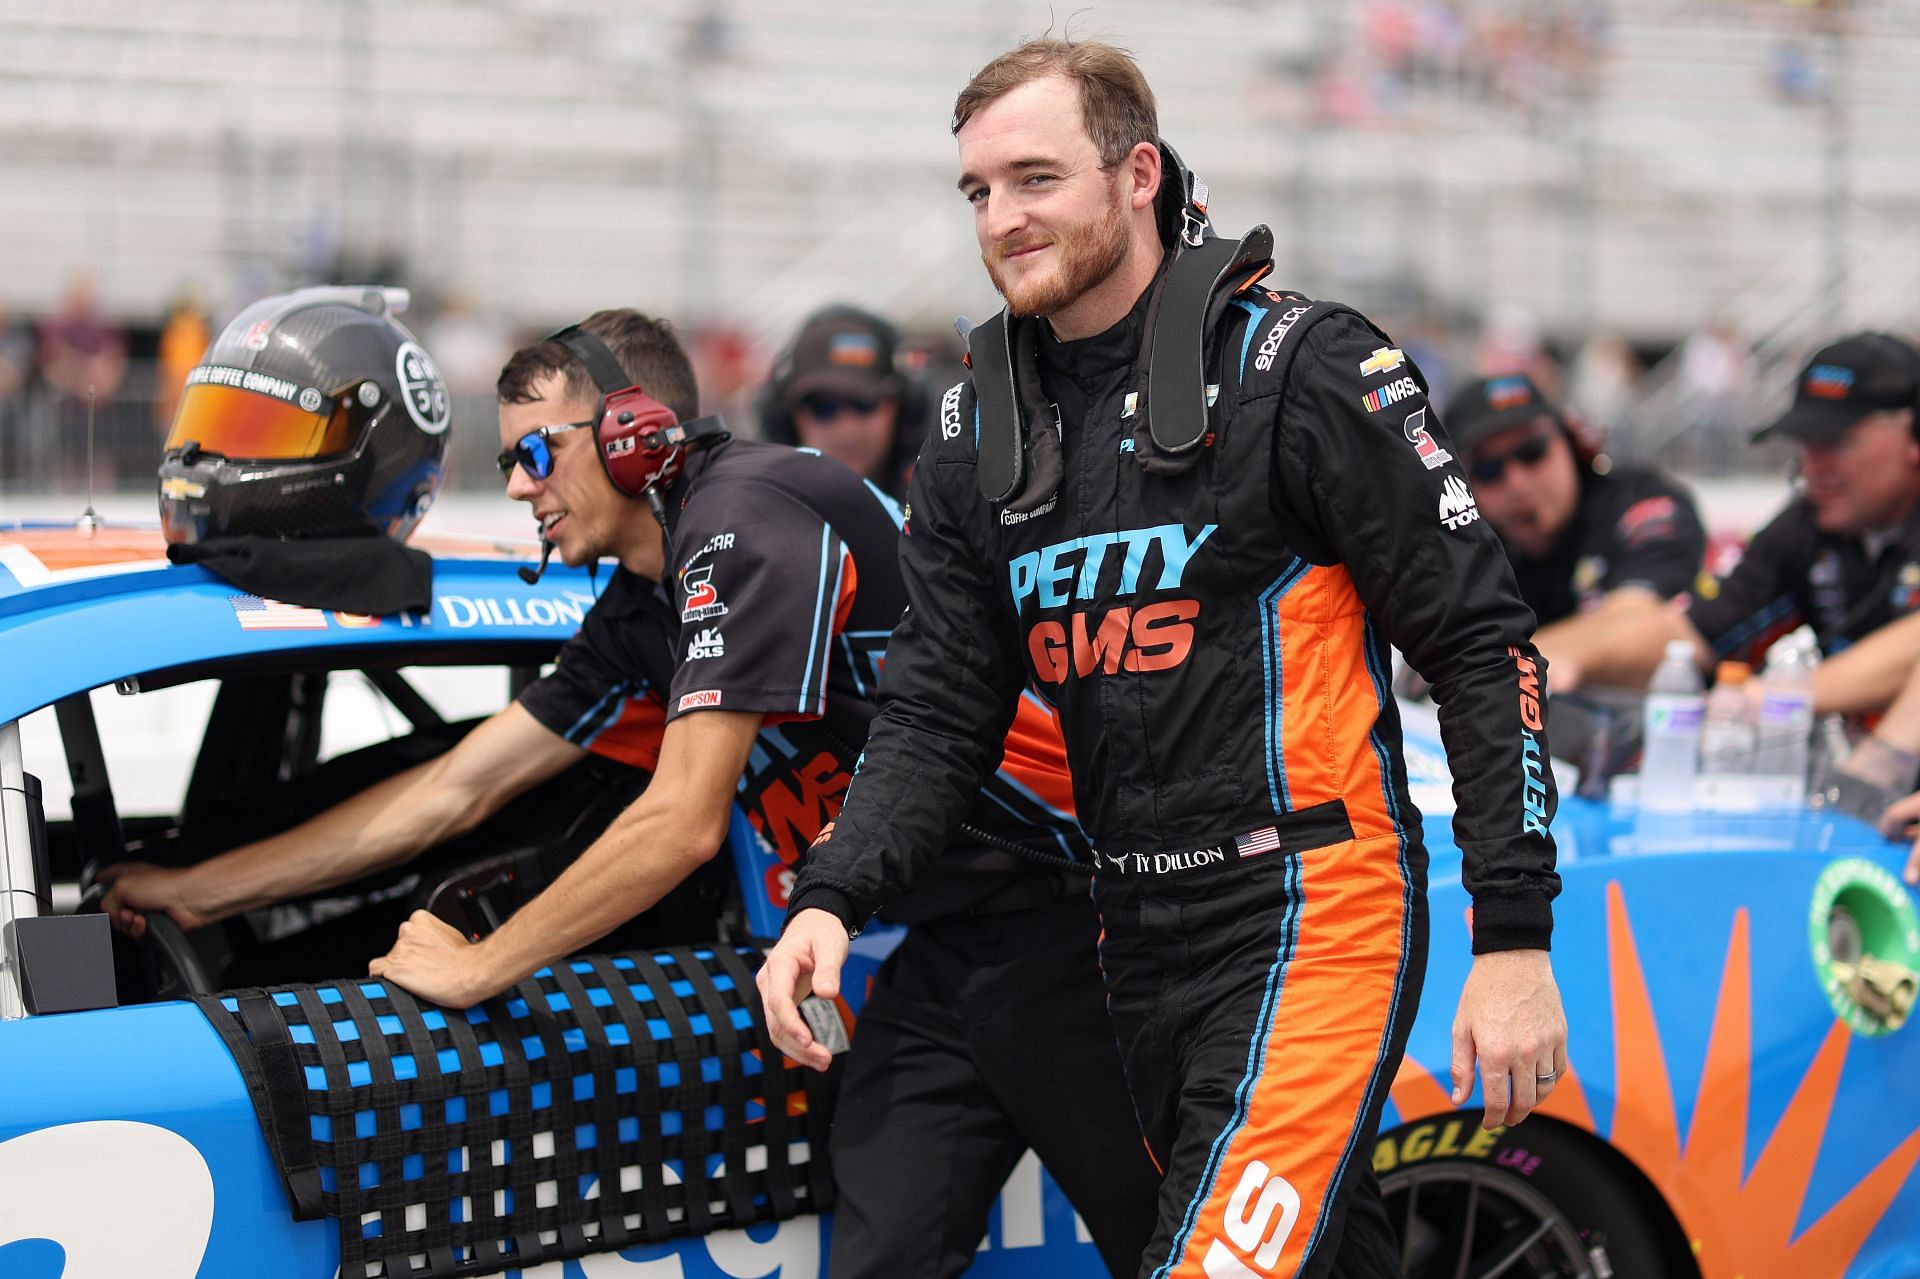 Ty Dillon and crew walk the grid during practice for the NASCAR Cup Series Ambetter 301 at New Hampshire Motor Speedway